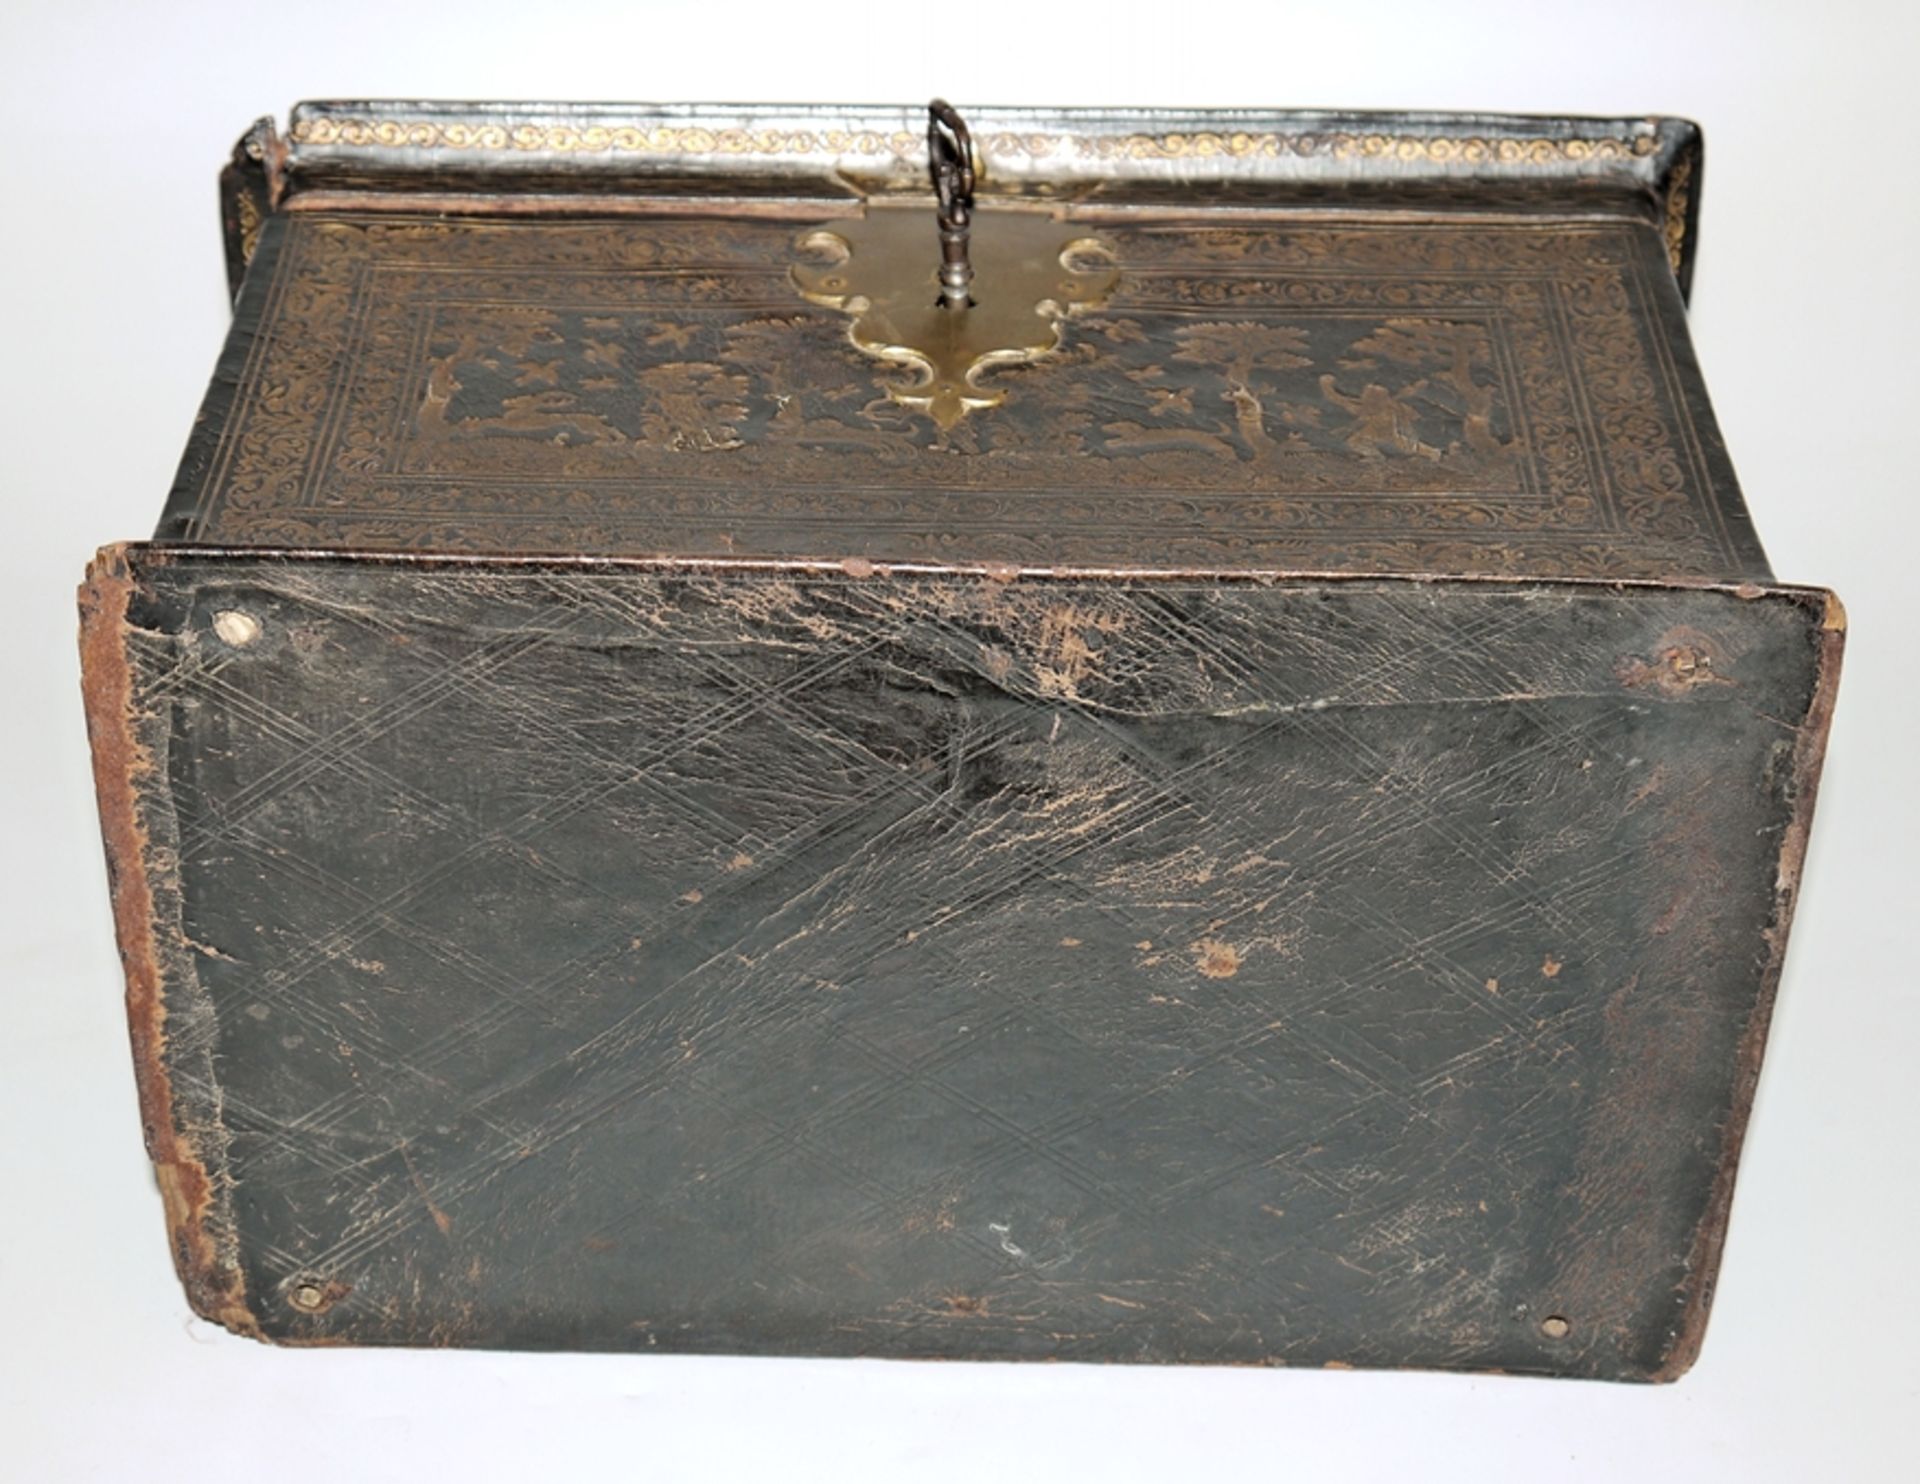 A Flemish leather casket with hunting scenes, probably Antwerp, c. 1600 - Image 7 of 7